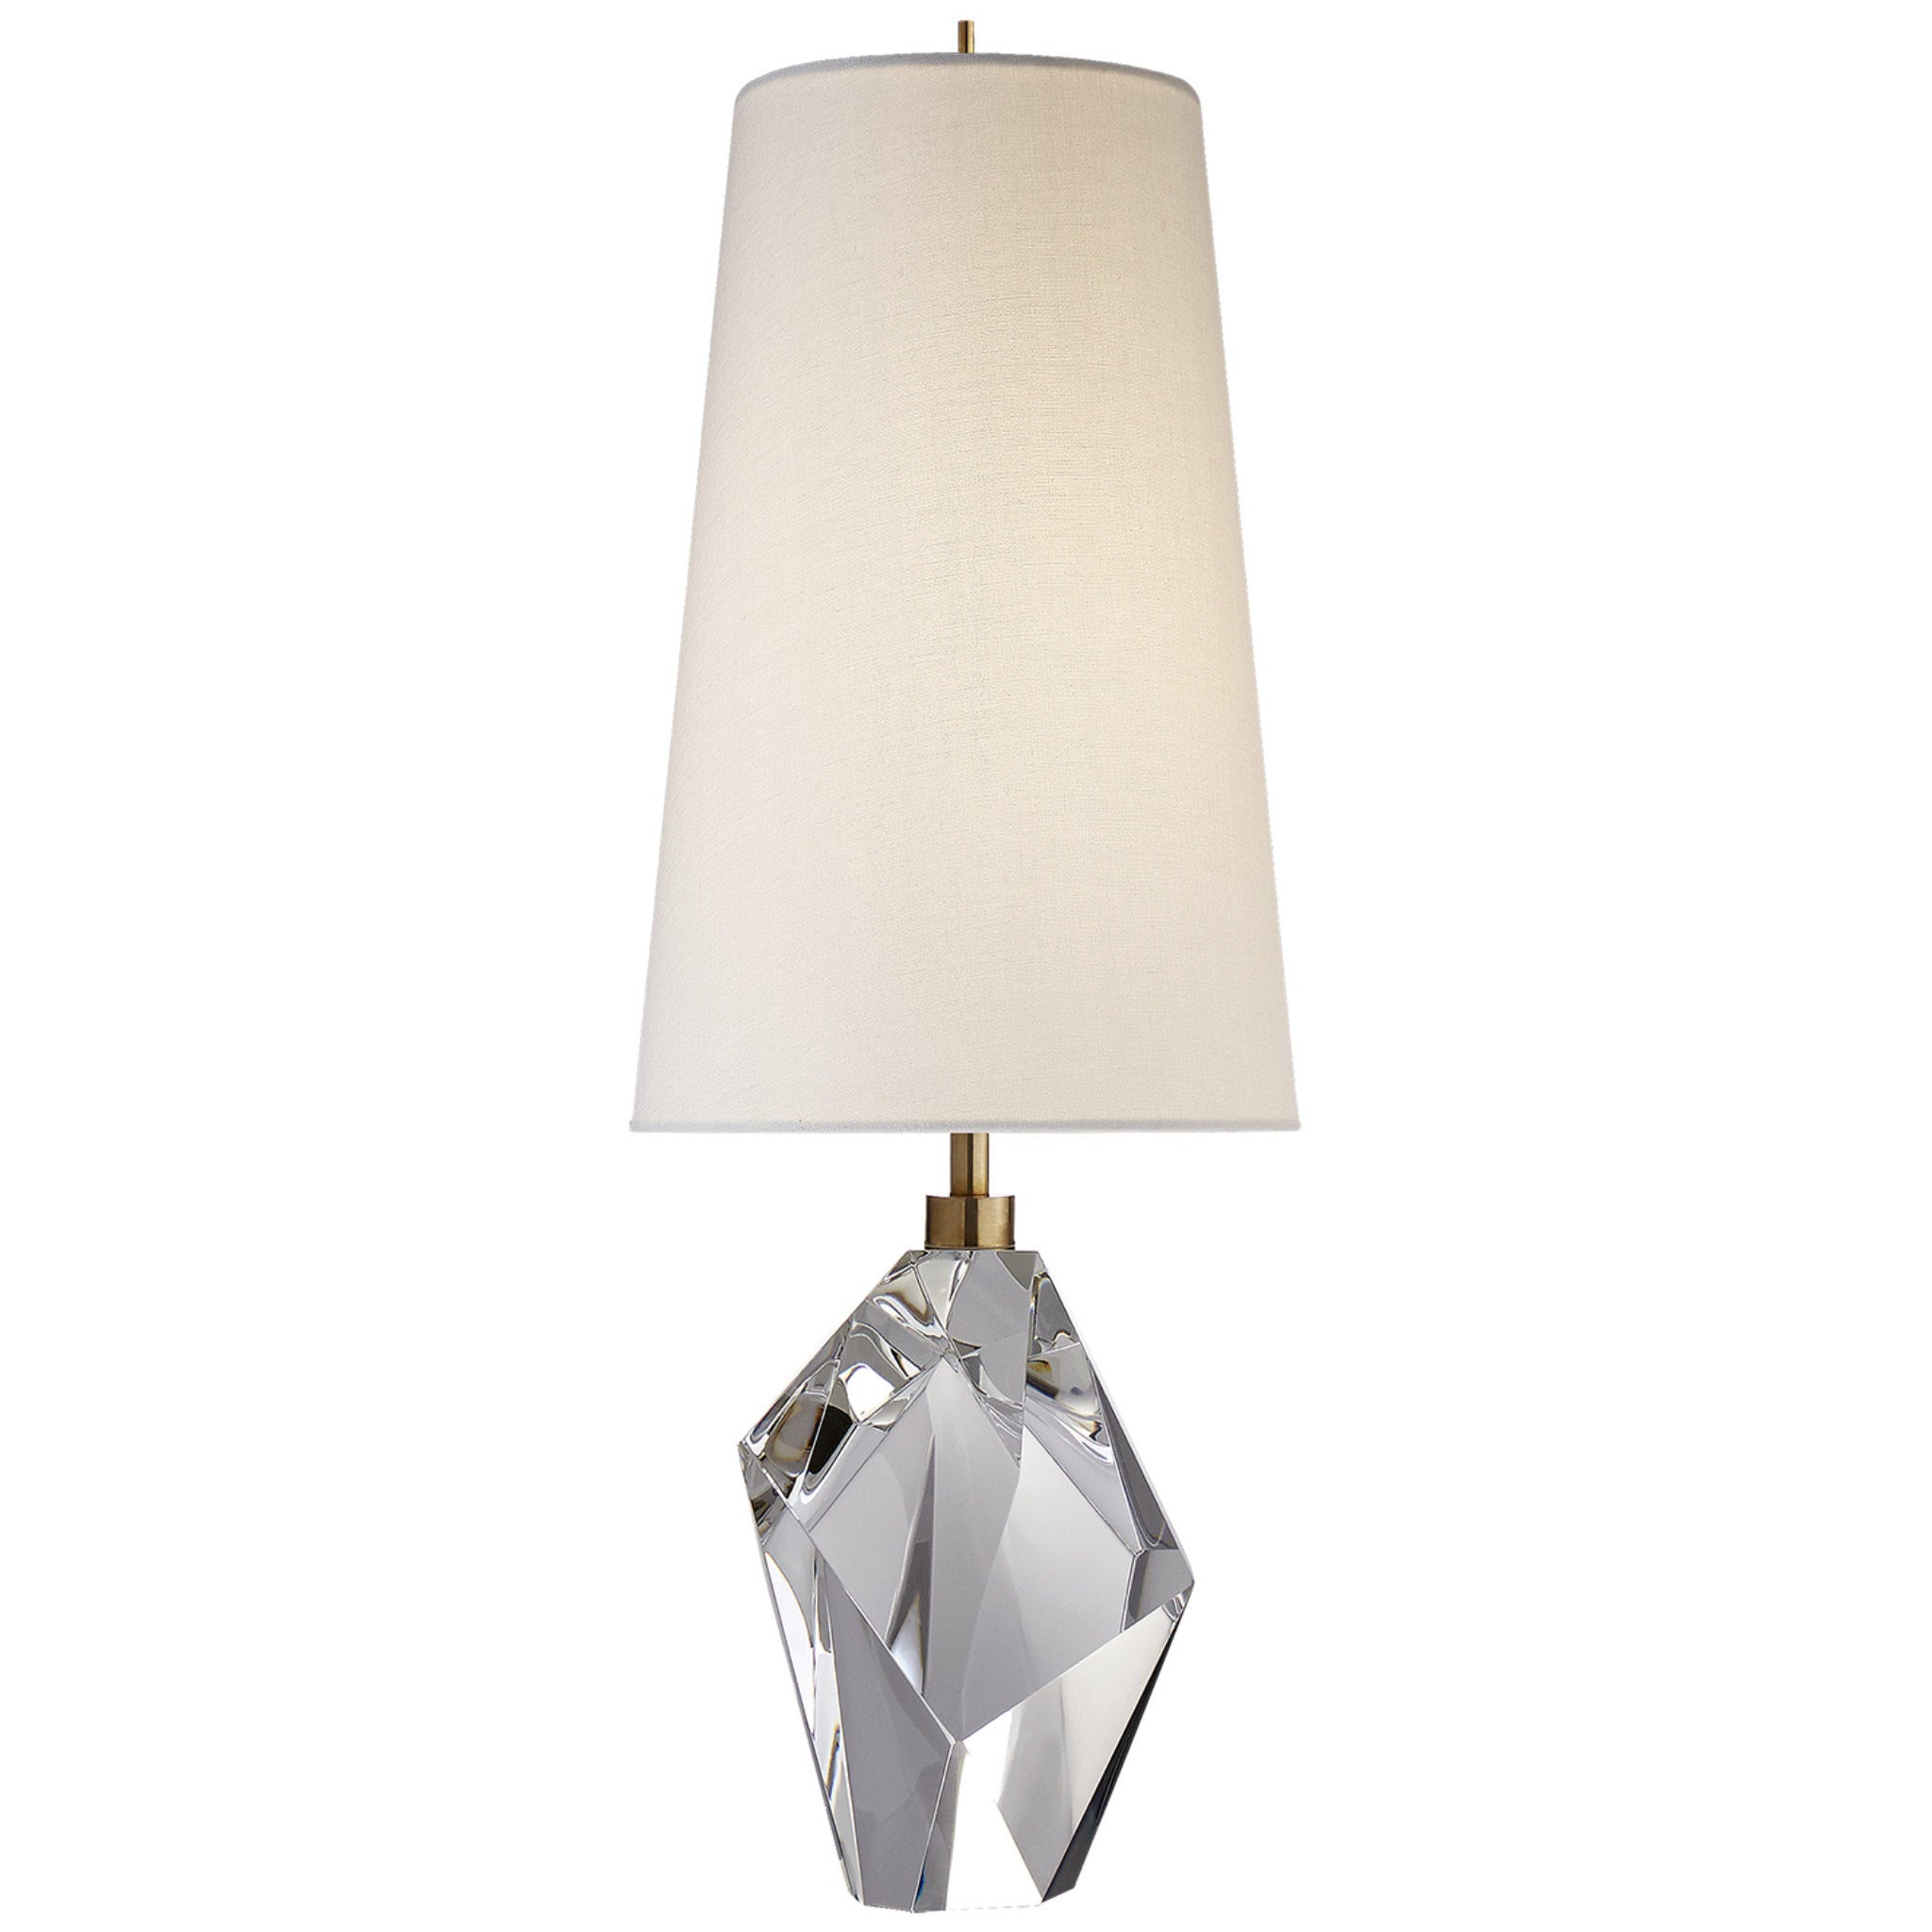 Kelly Wearstler Halcyon Accent Table Lamp in Crystal with Linen Shade